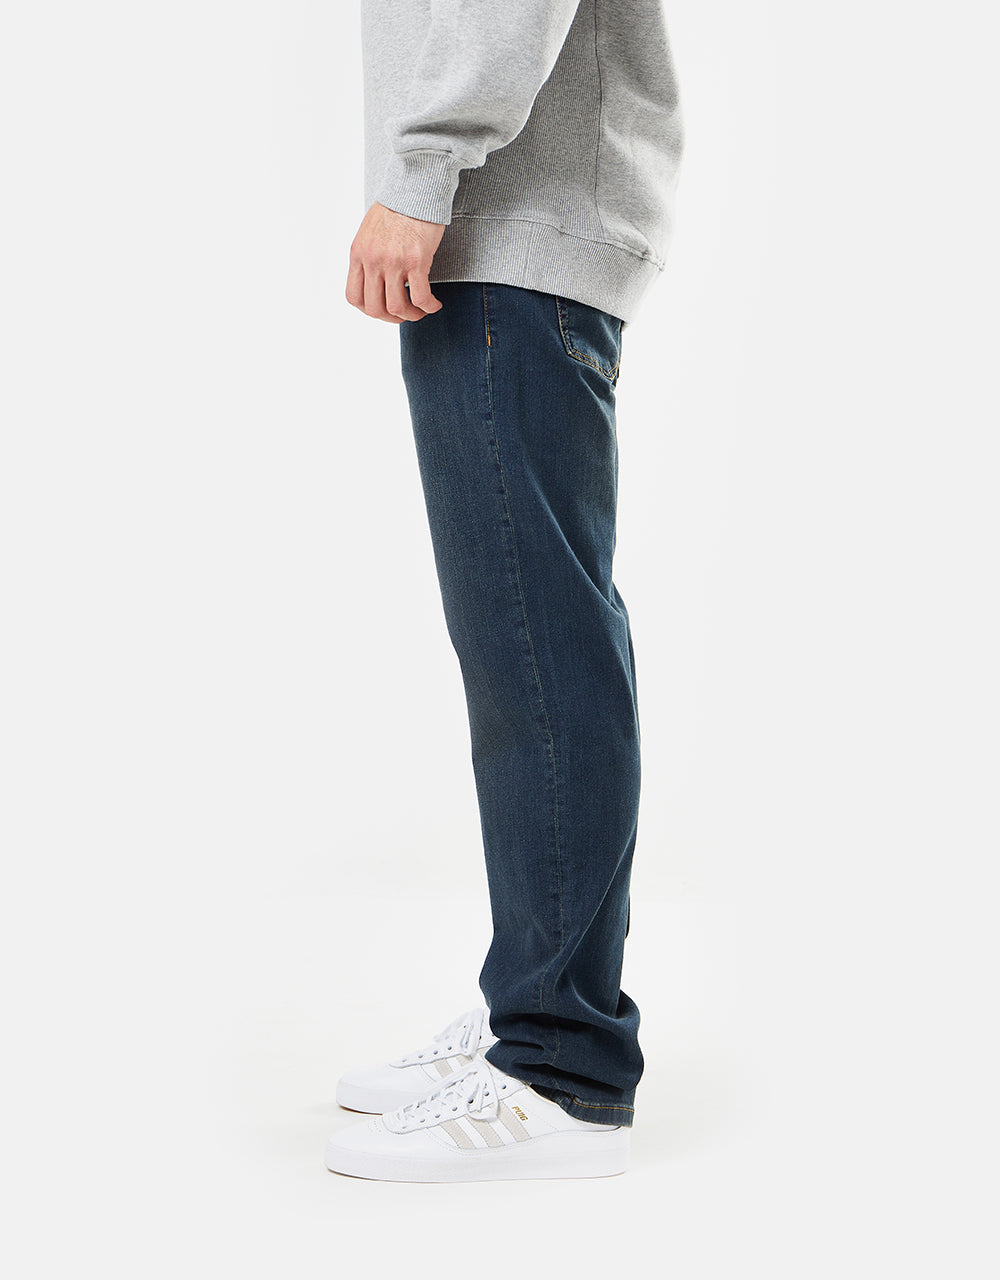 Route One Relaxed Denim Jeans - Washed Indigo